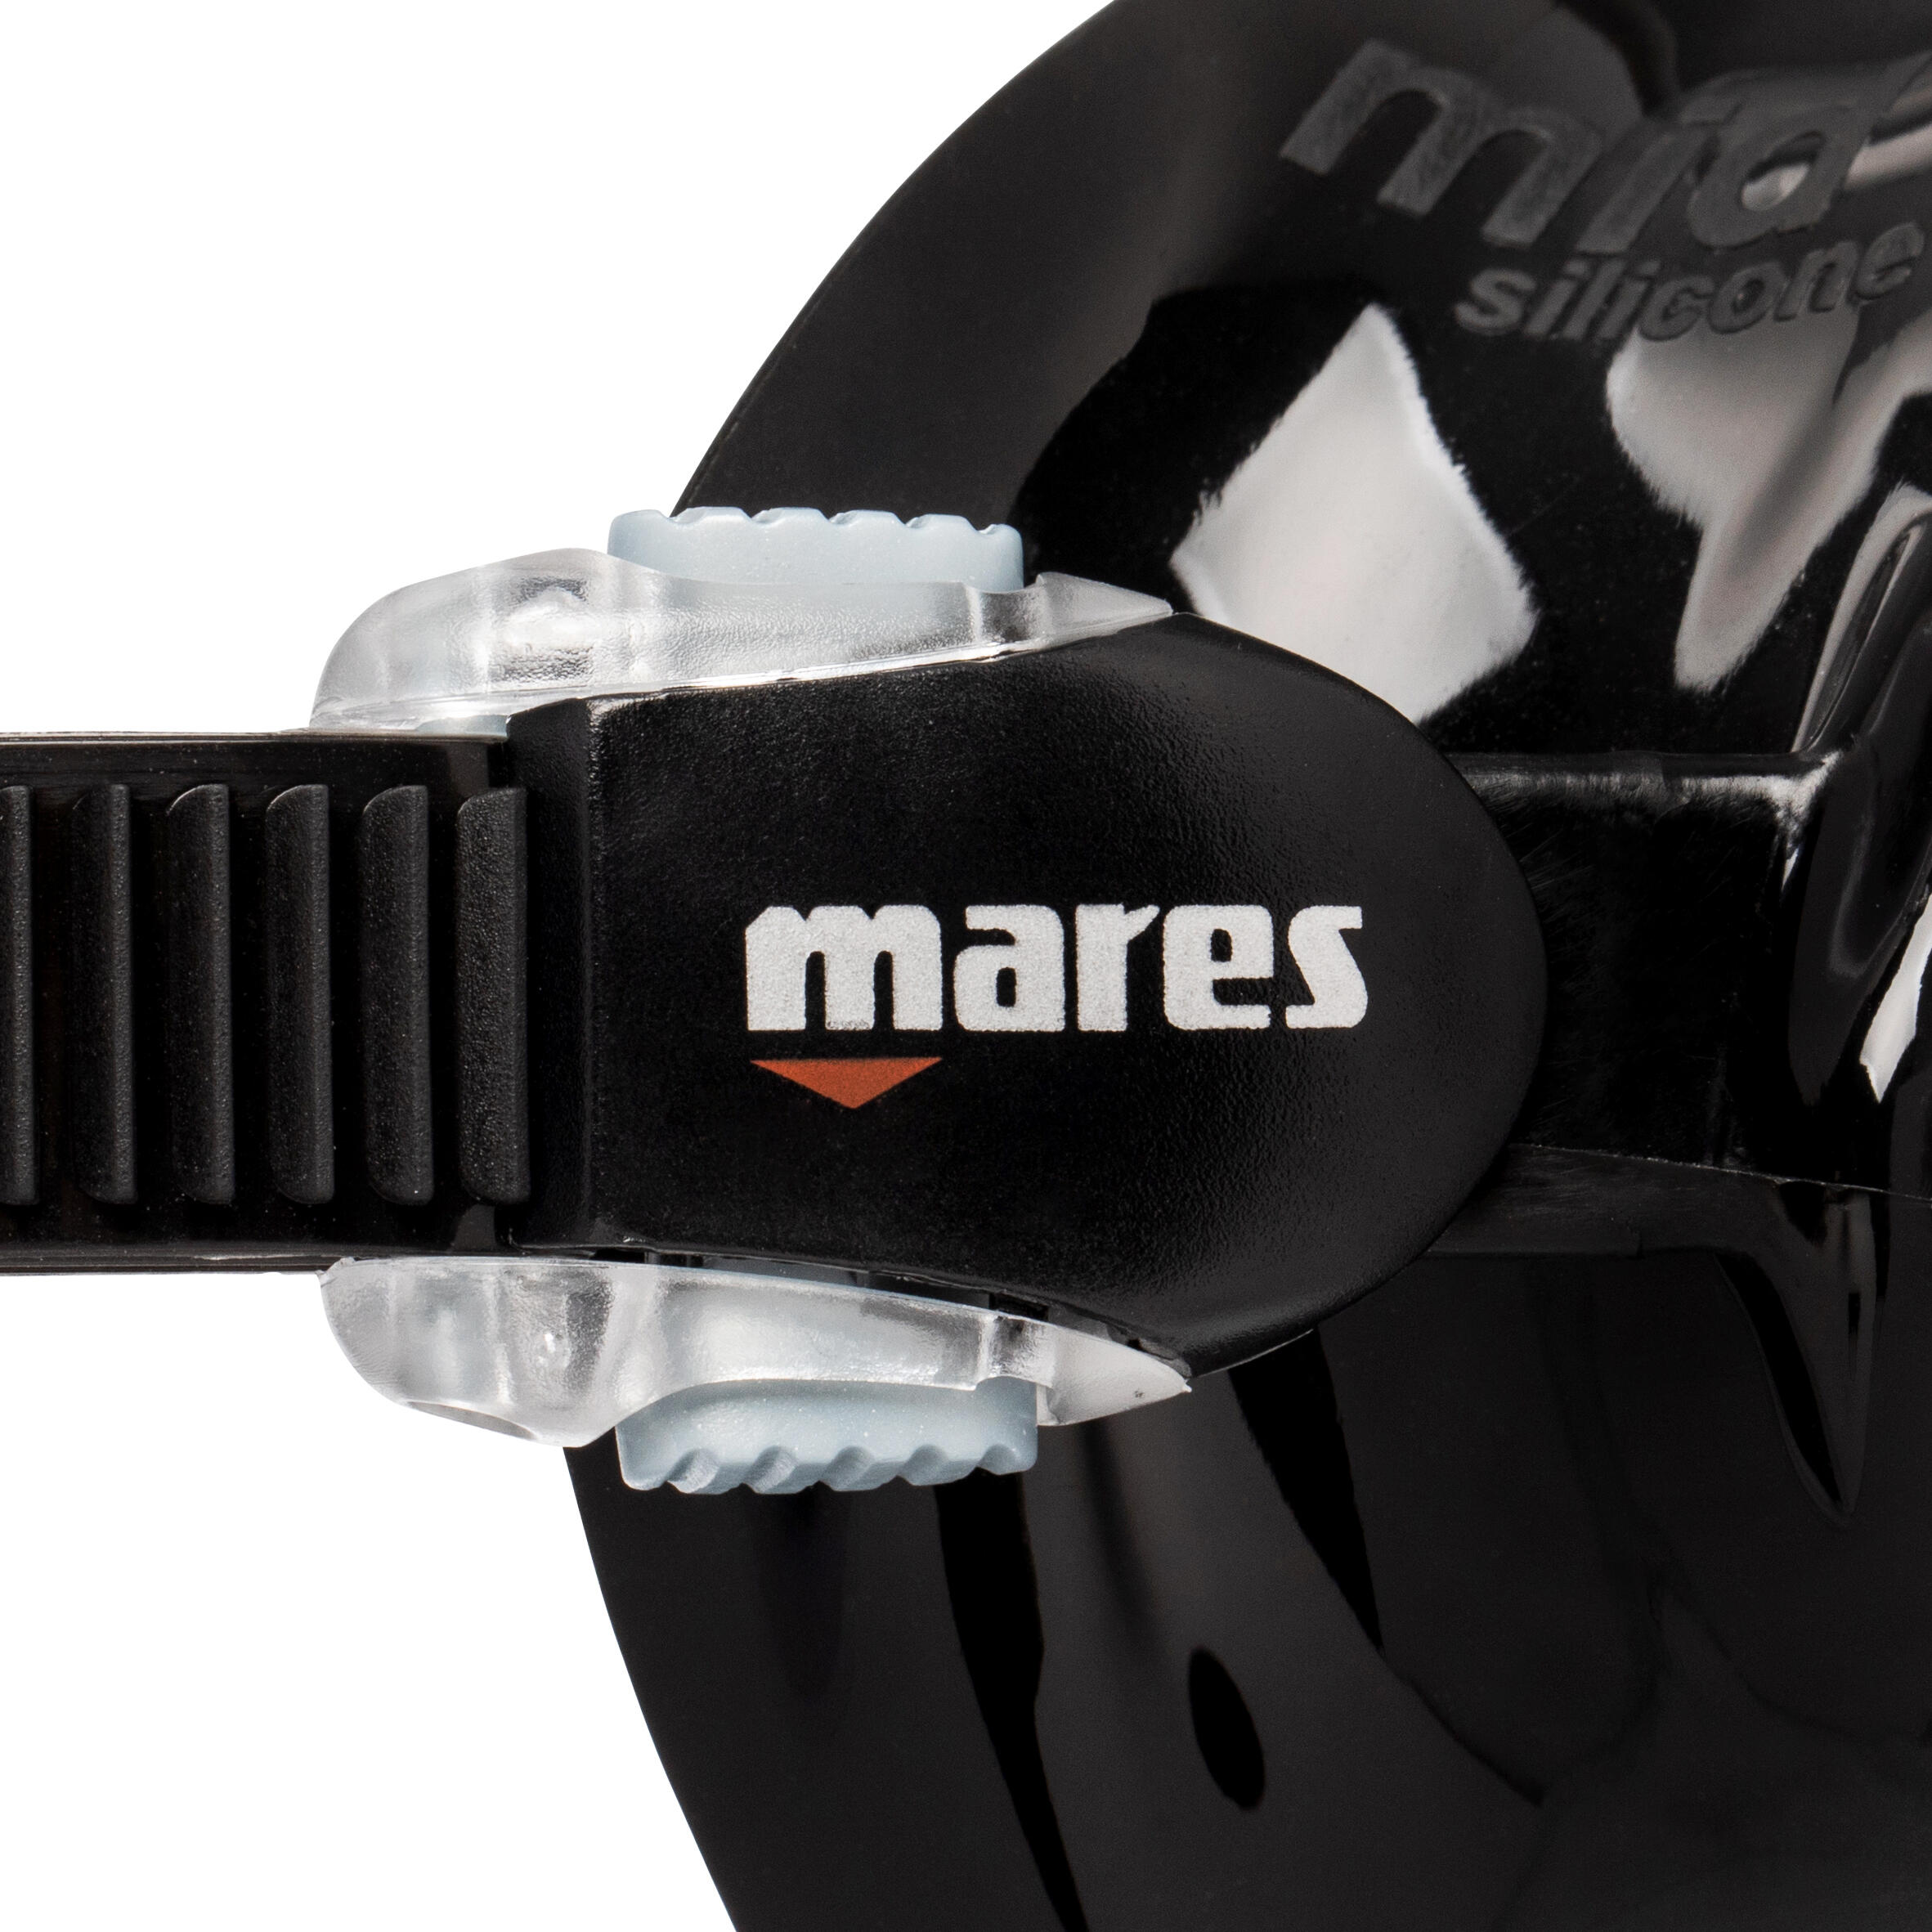 MARES X-VISION MID 2.0 MASK